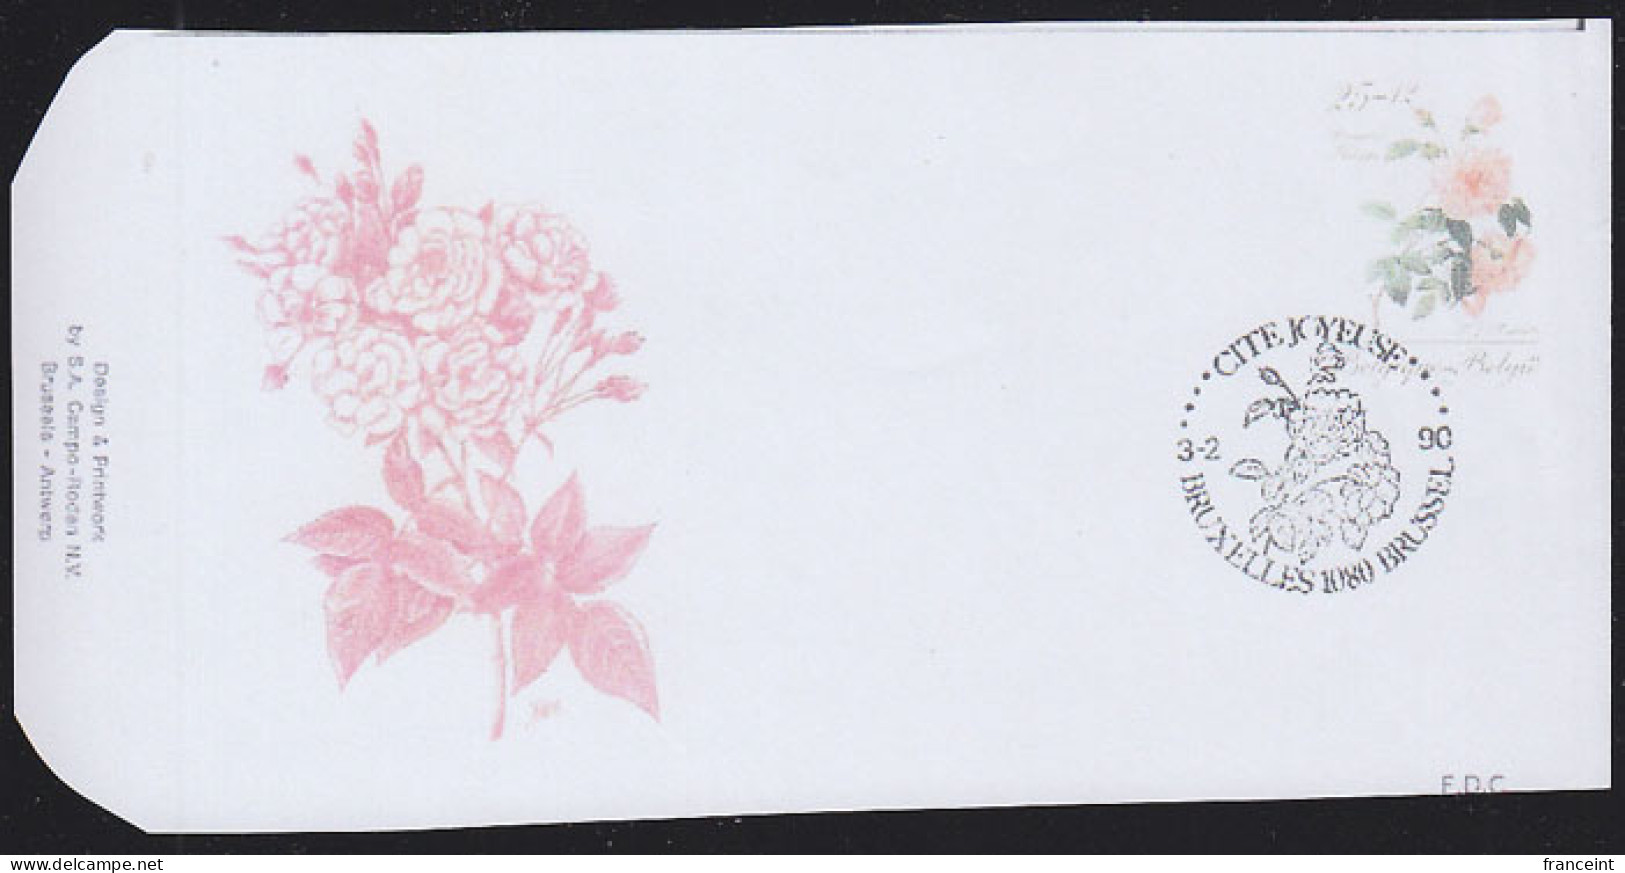 BELGIUM(1990) Bengale Philippe Rose. Die Proof In Red Signed By The Engraver, Representing The Cachet For FDC. Sc B1090 - Probe- Und Nachdrucke